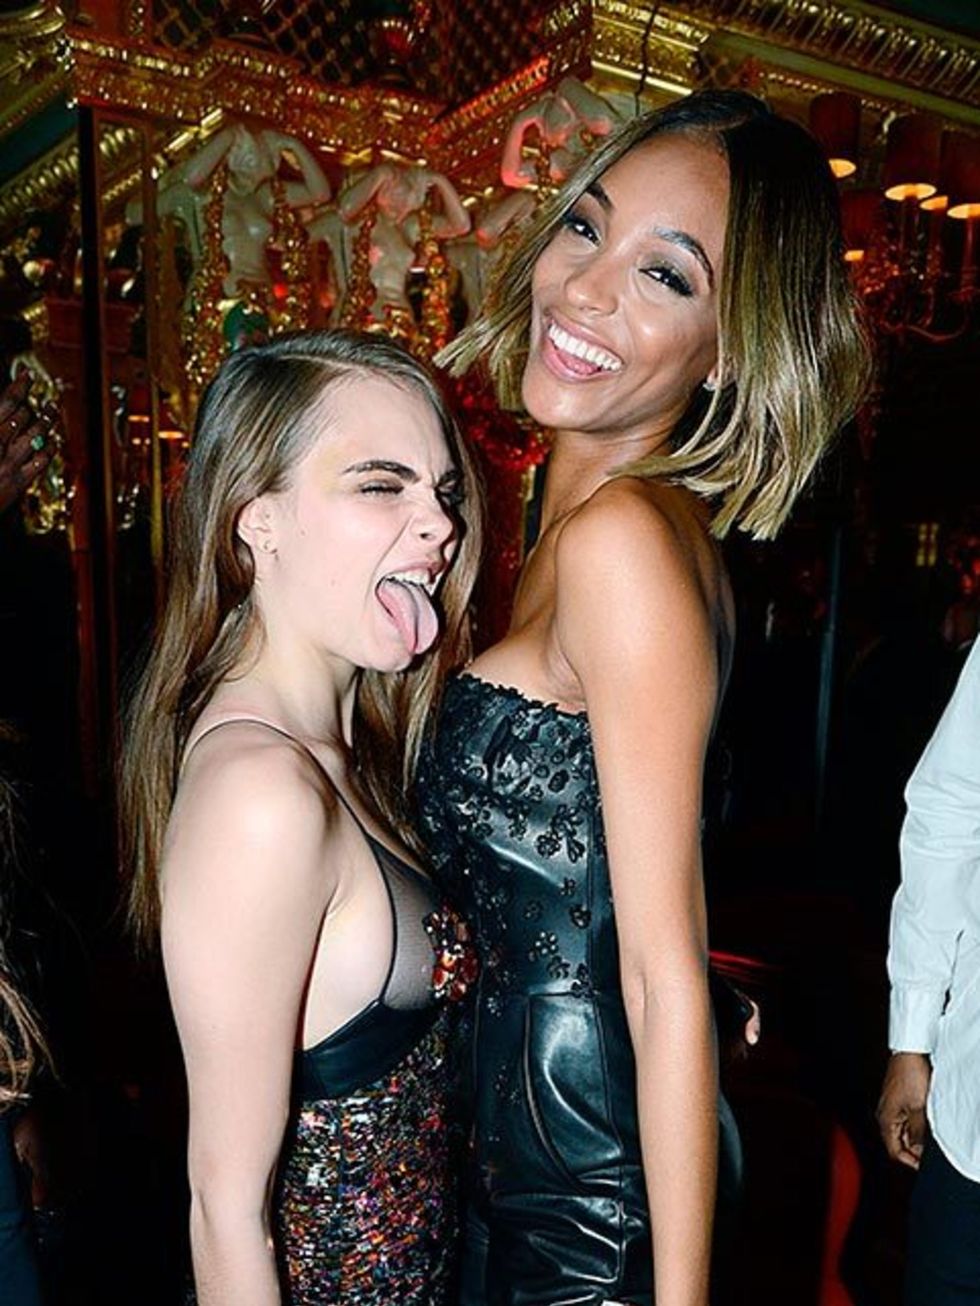 <p>Cara Delevingne and Jourdan Dunn at the Edward Enninful Celebrations British Fashion Awards after-party in London, December 2014.</p>